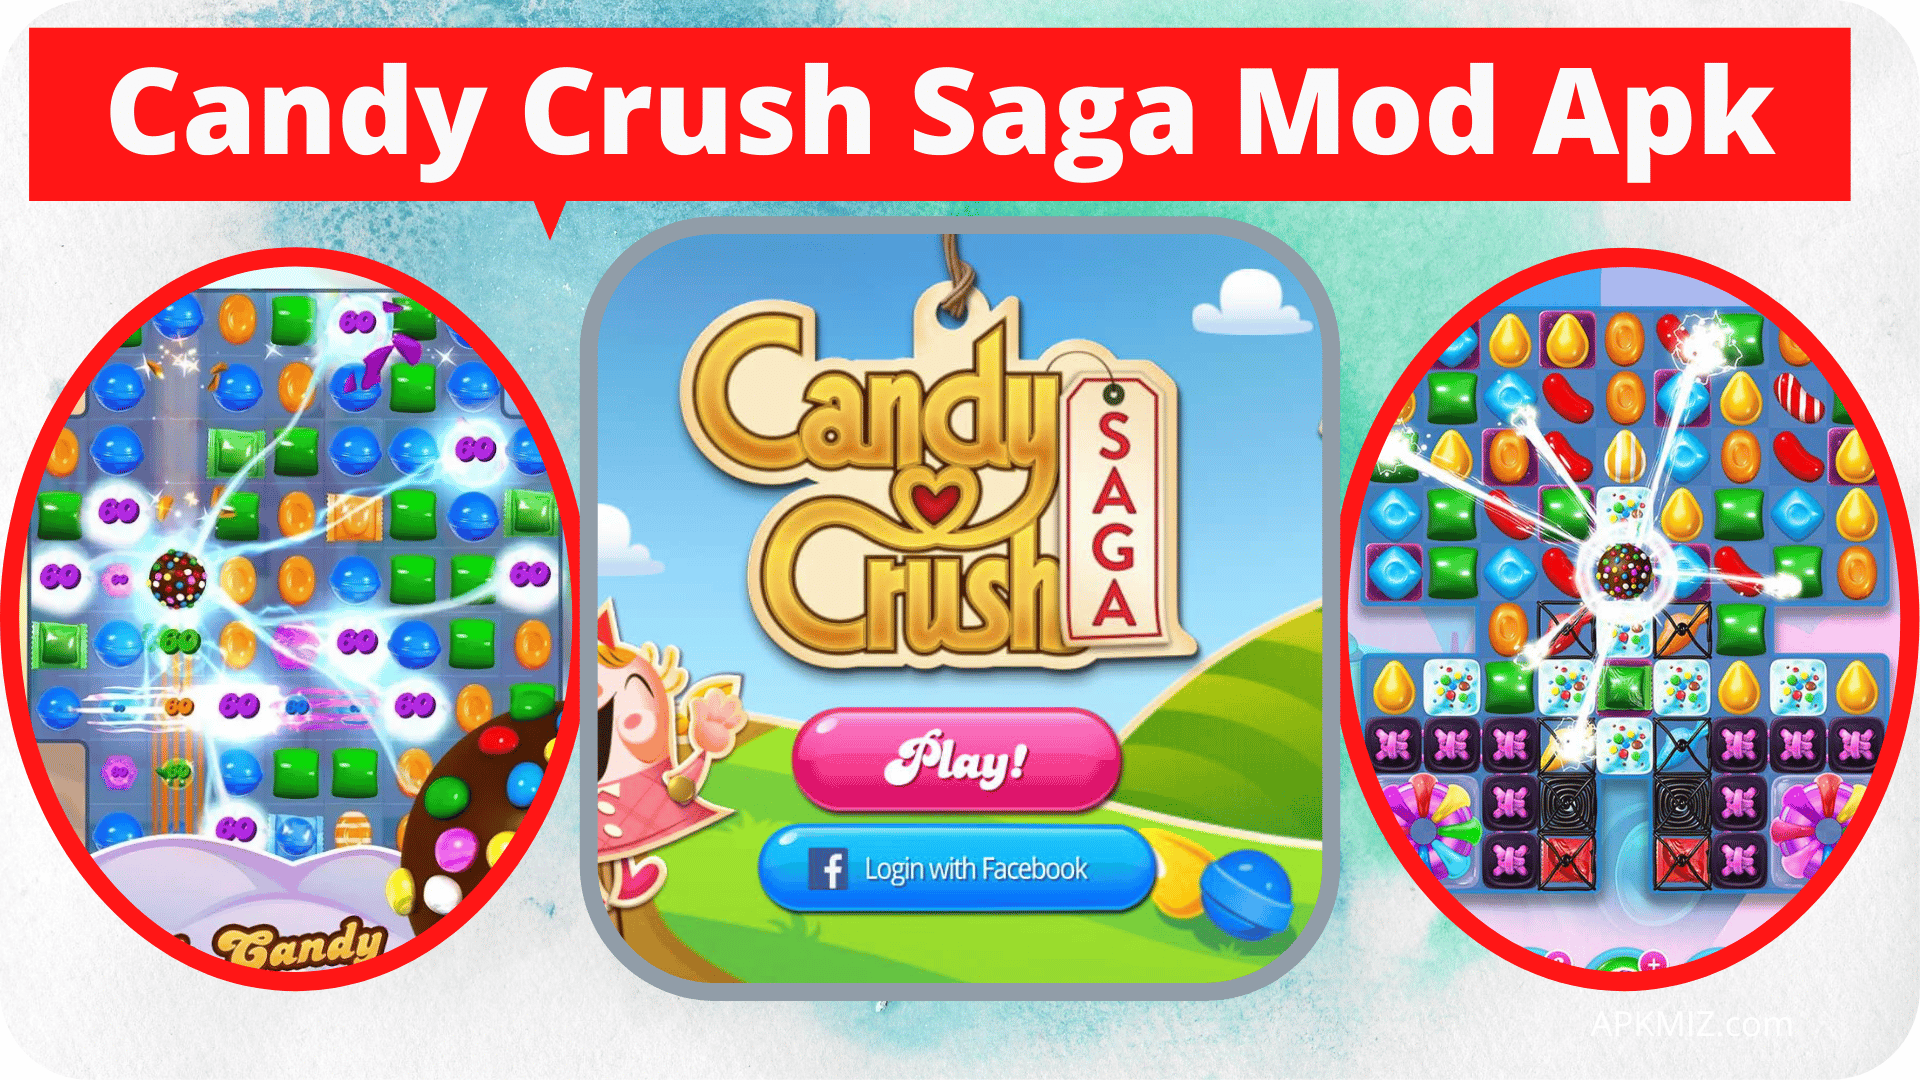 Candy Crush Saga is a game many people play on Facebook. But it's also available for mobile devices. It's free to download and play, but you can buy extra lives if you run out. Every level is timed, so you have to decide how quickly you'll make matches. 